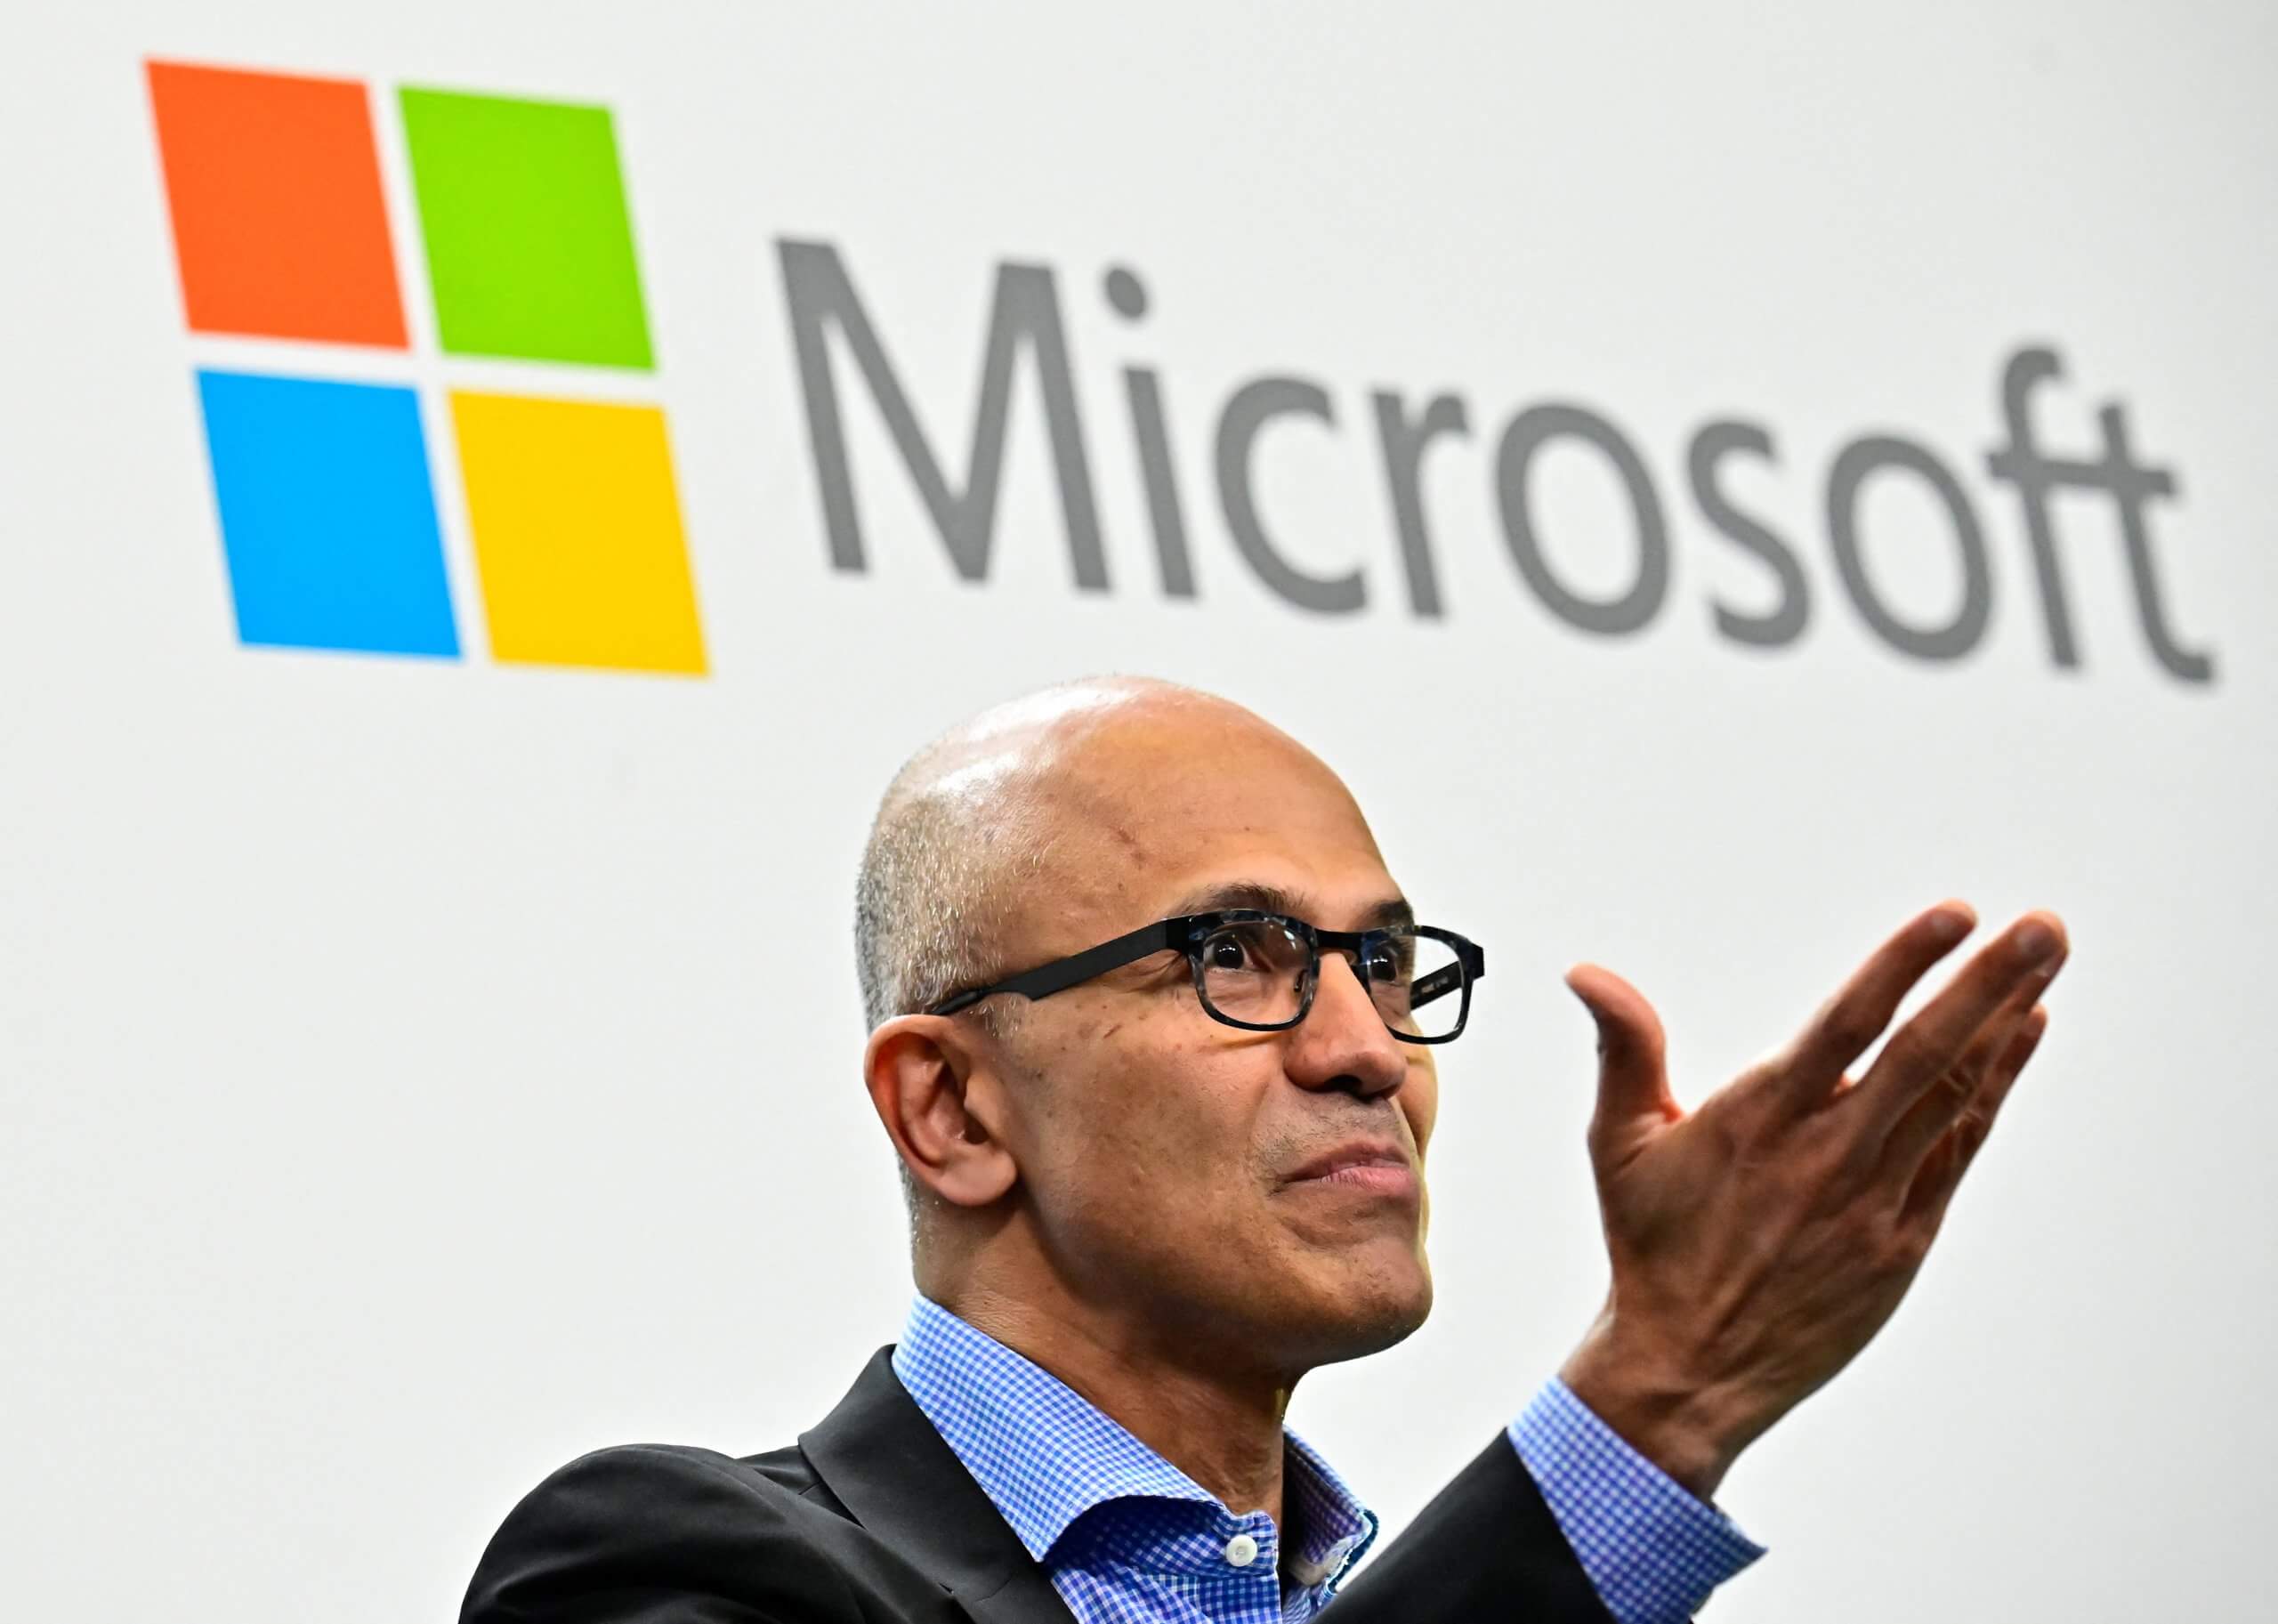 Microsoft Azure Cloud is under fire in Europe for being too competitively advantaged